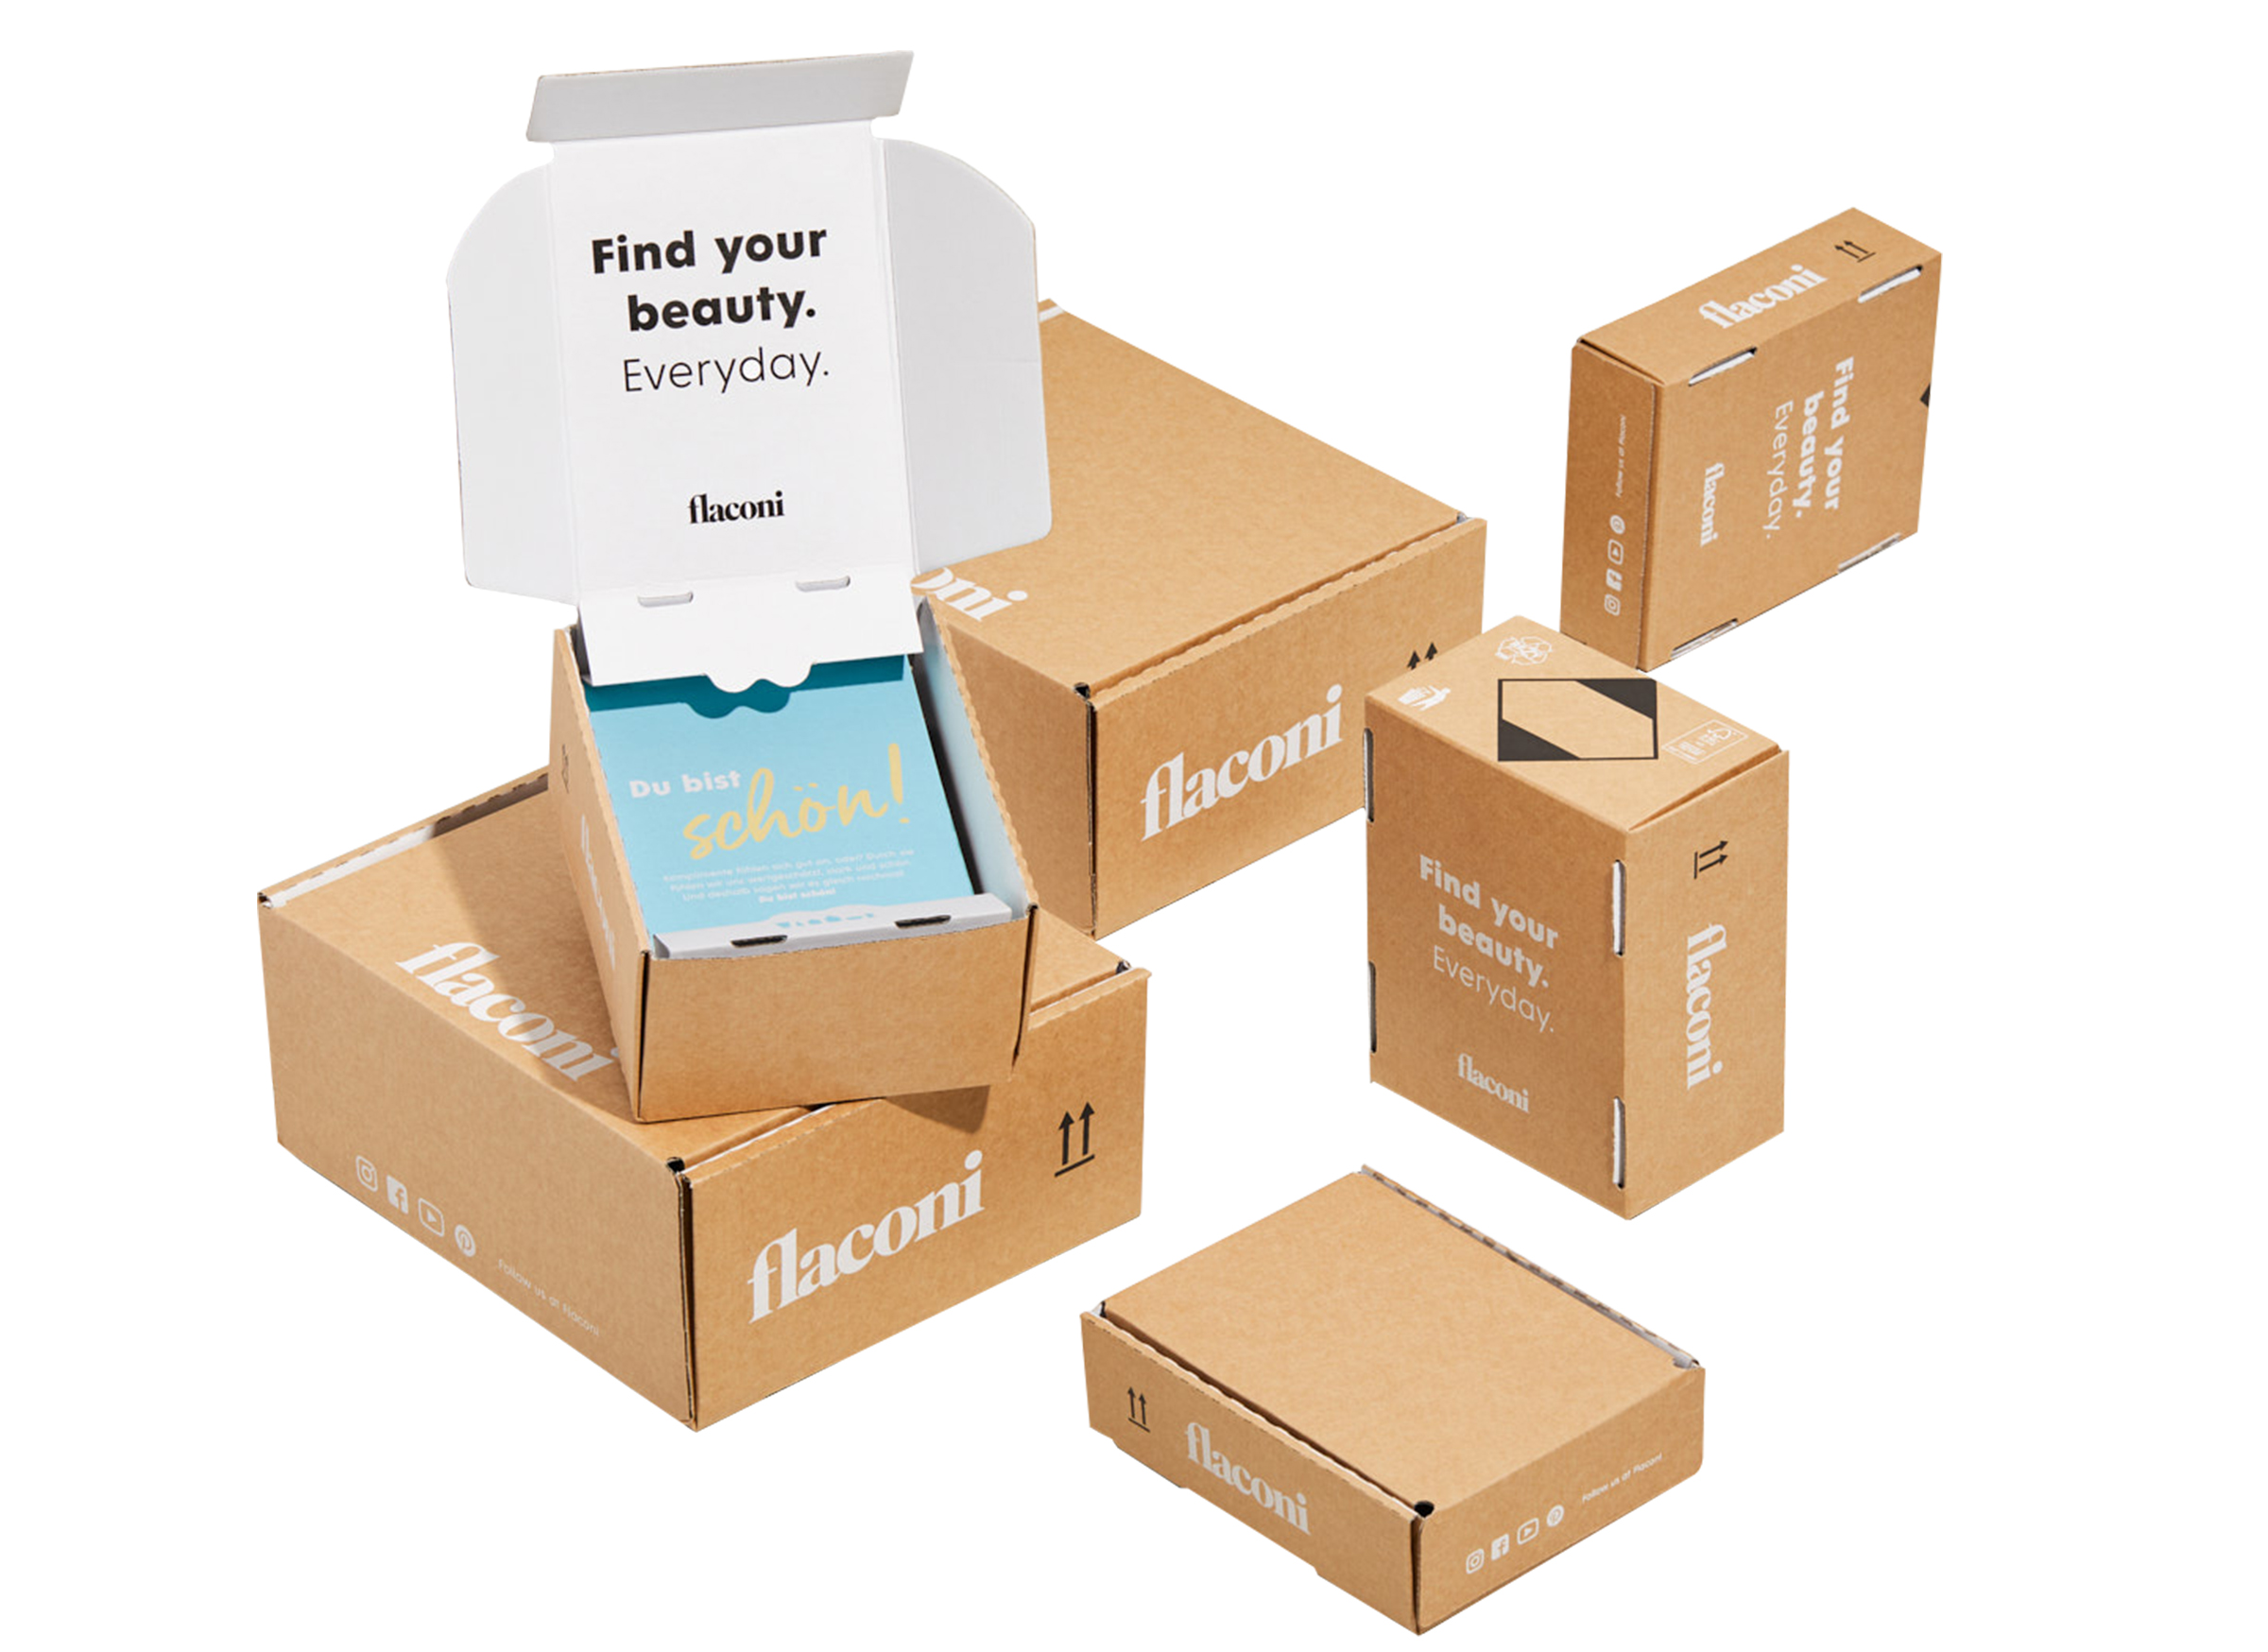 THIMM develops shipping packaging for flaconi 